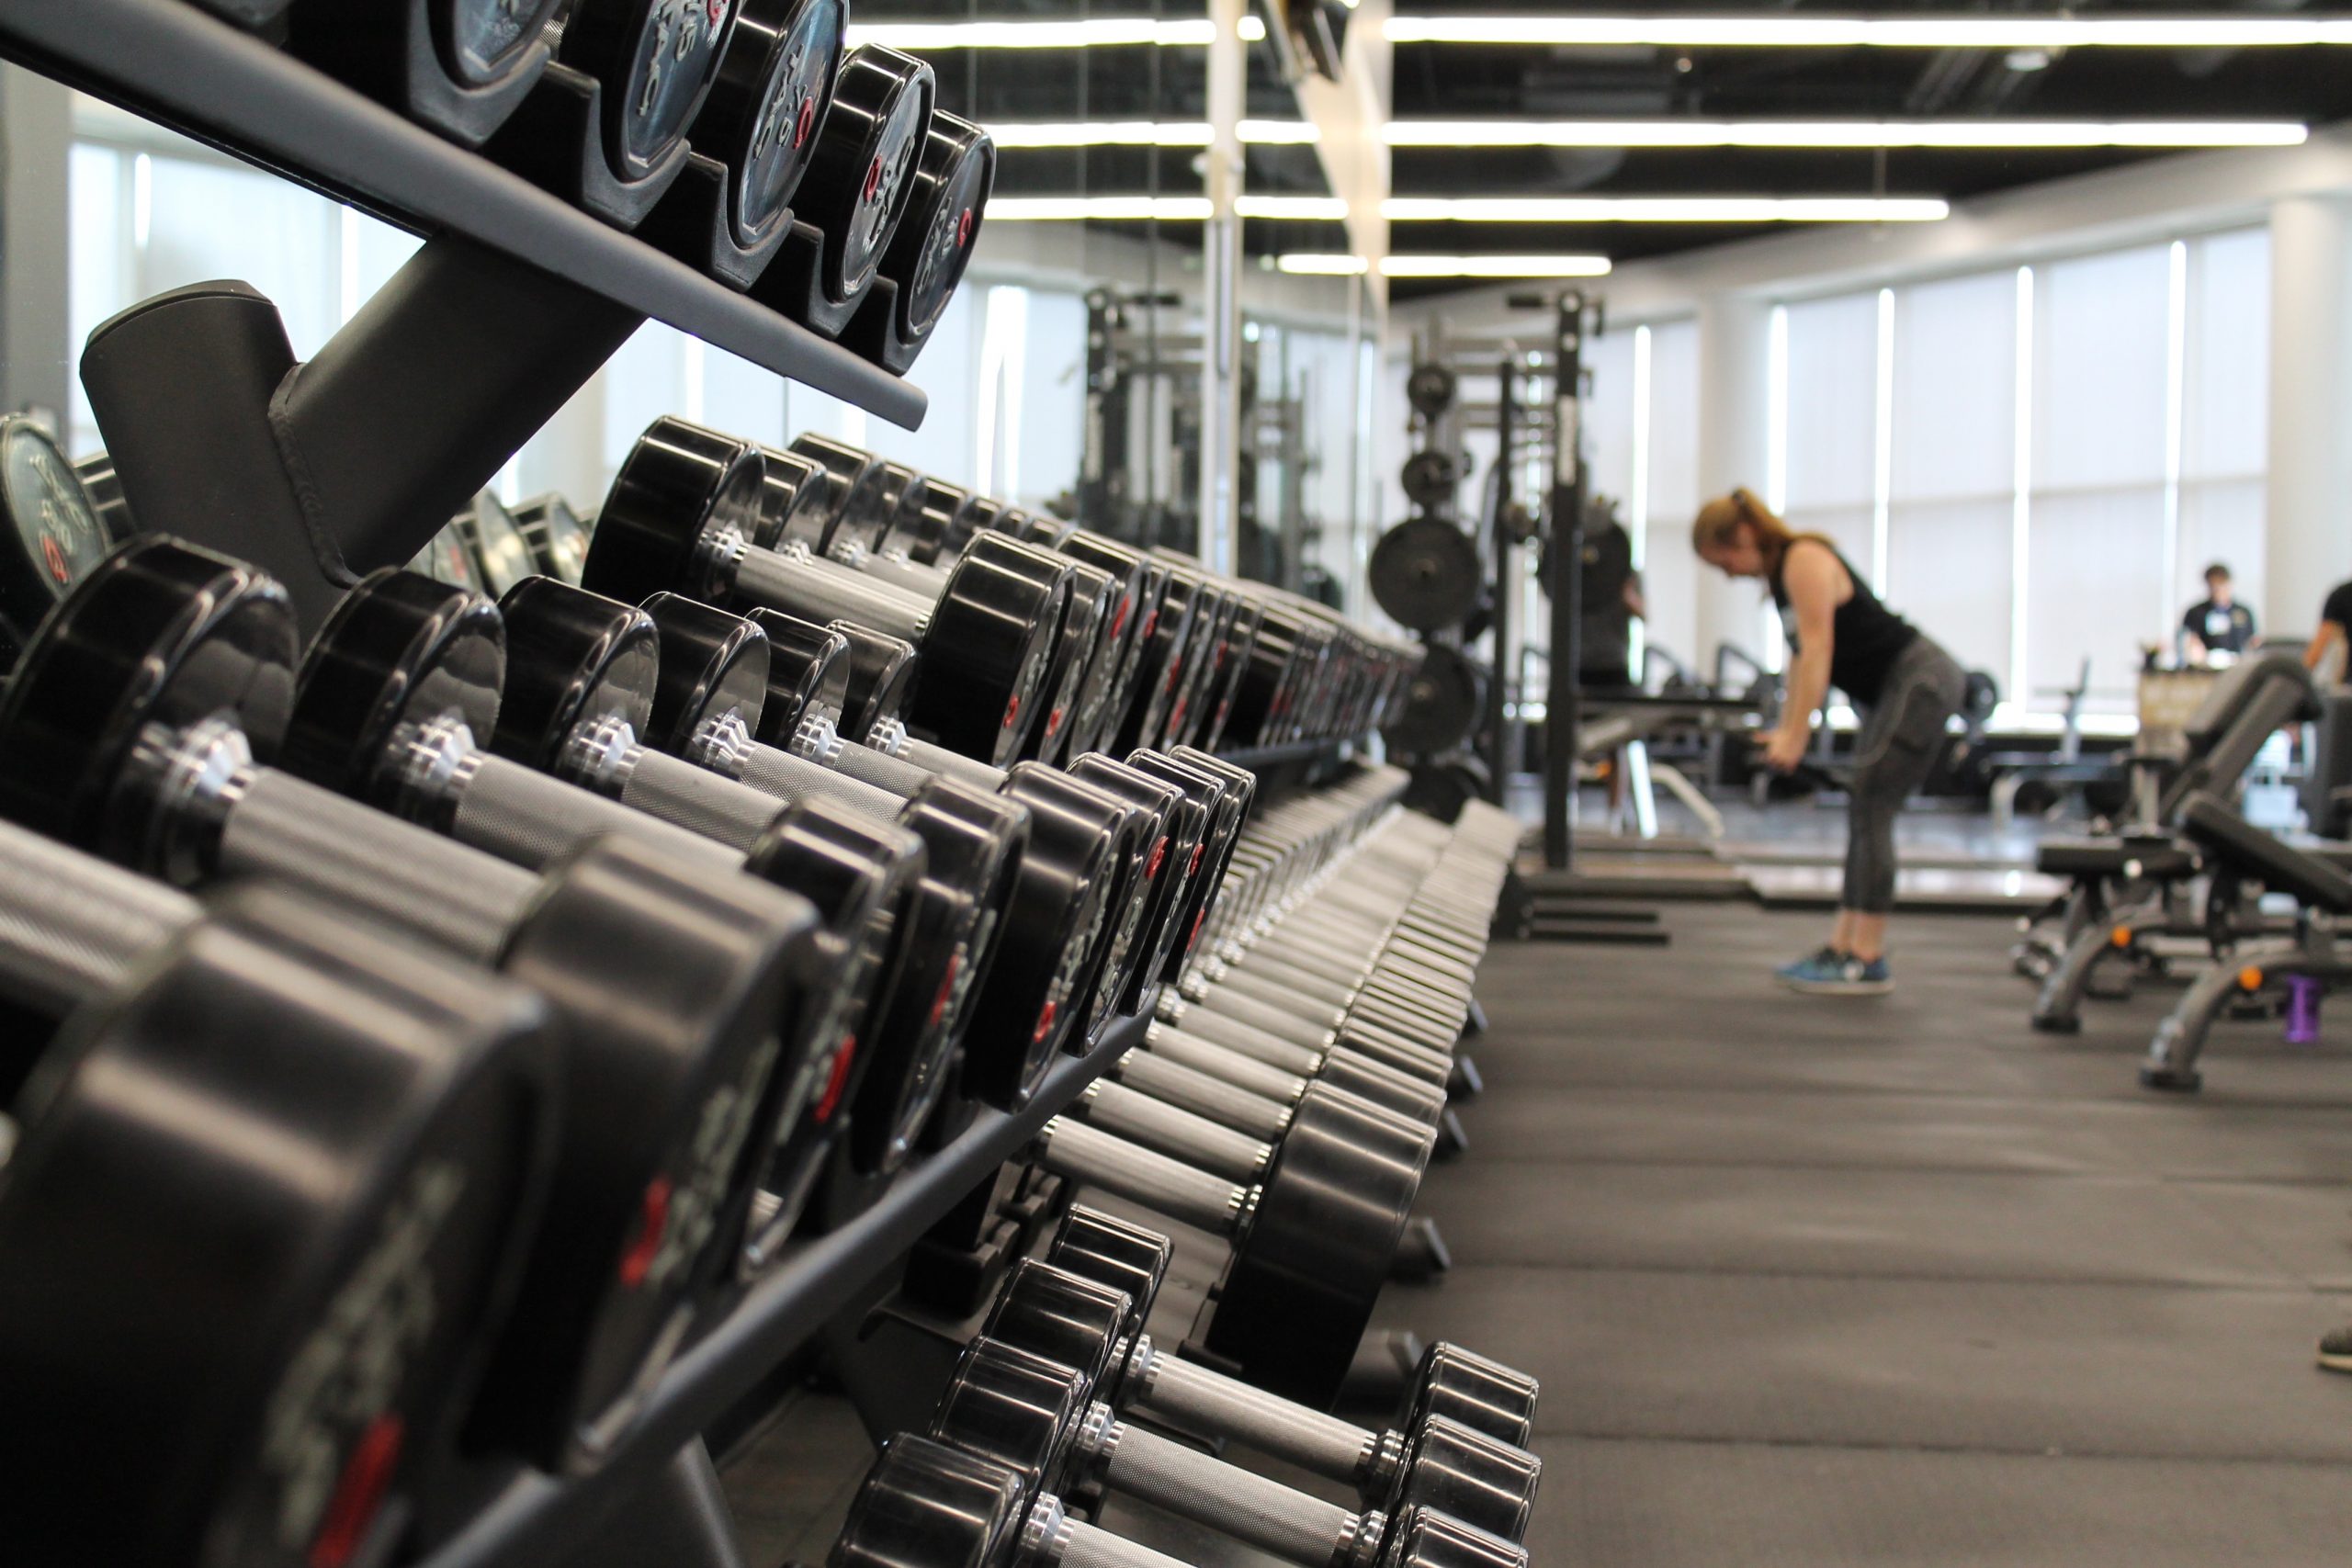 Cheapest gym memberships in the UK